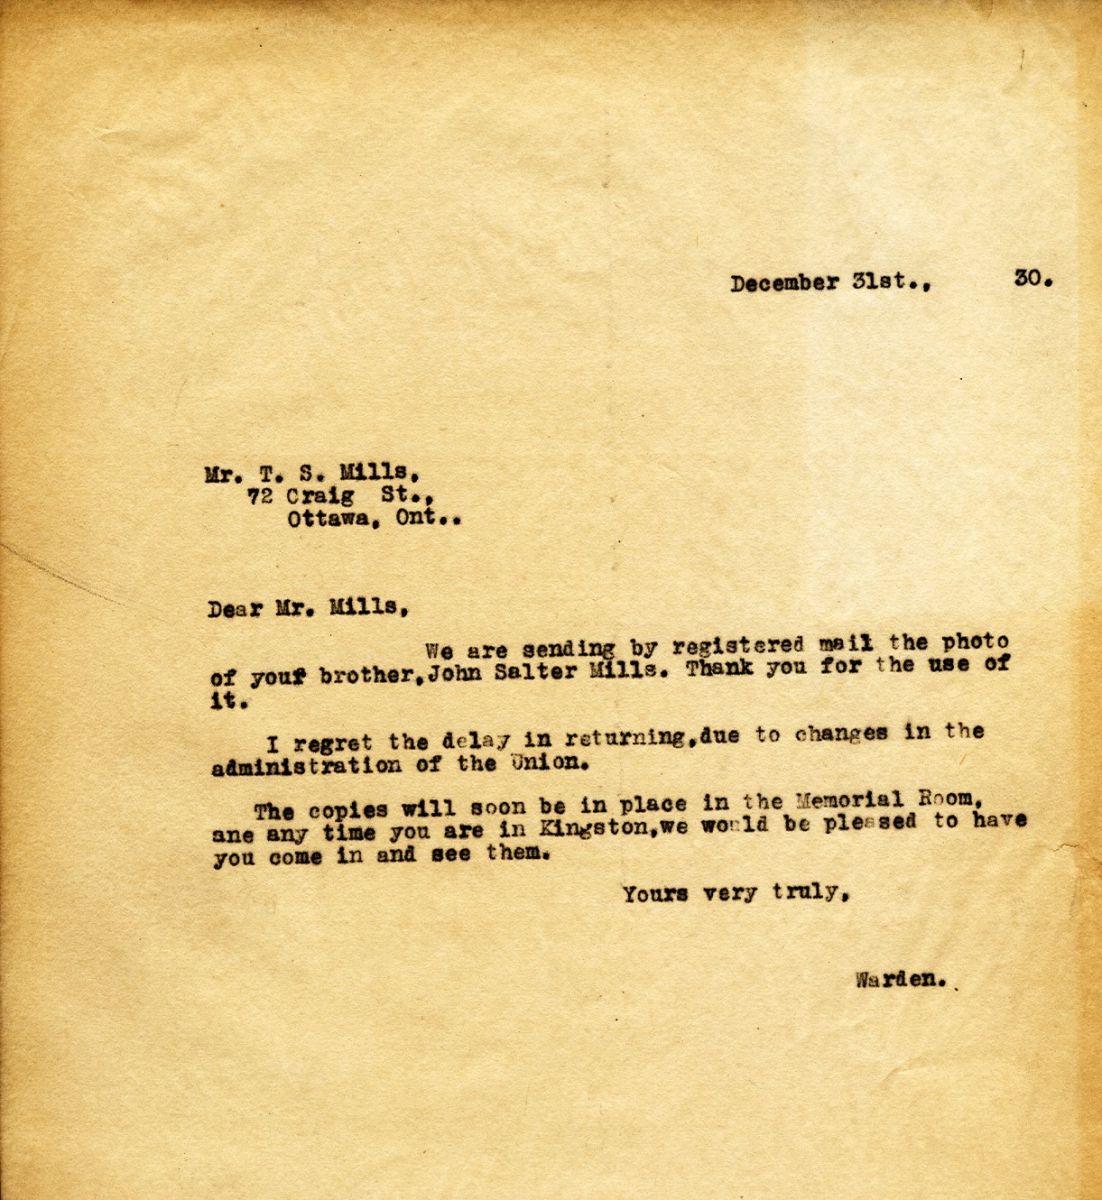 Letter from the Warden to Mr. J.S. Mills, 31st December 1930